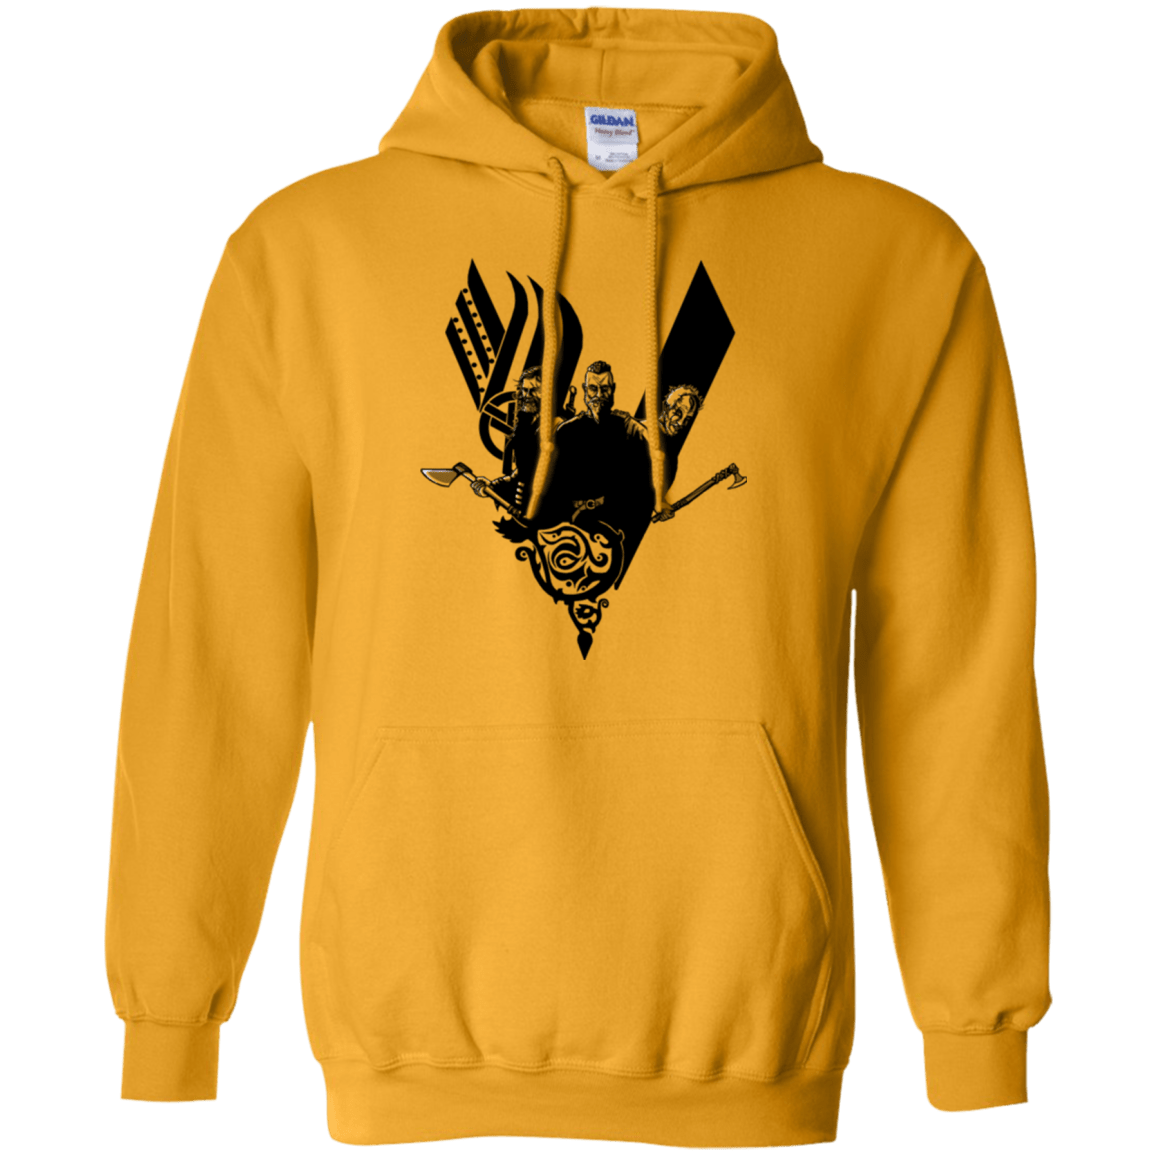 Sweatshirts Gold / Small Plunder Pullover Hoodie